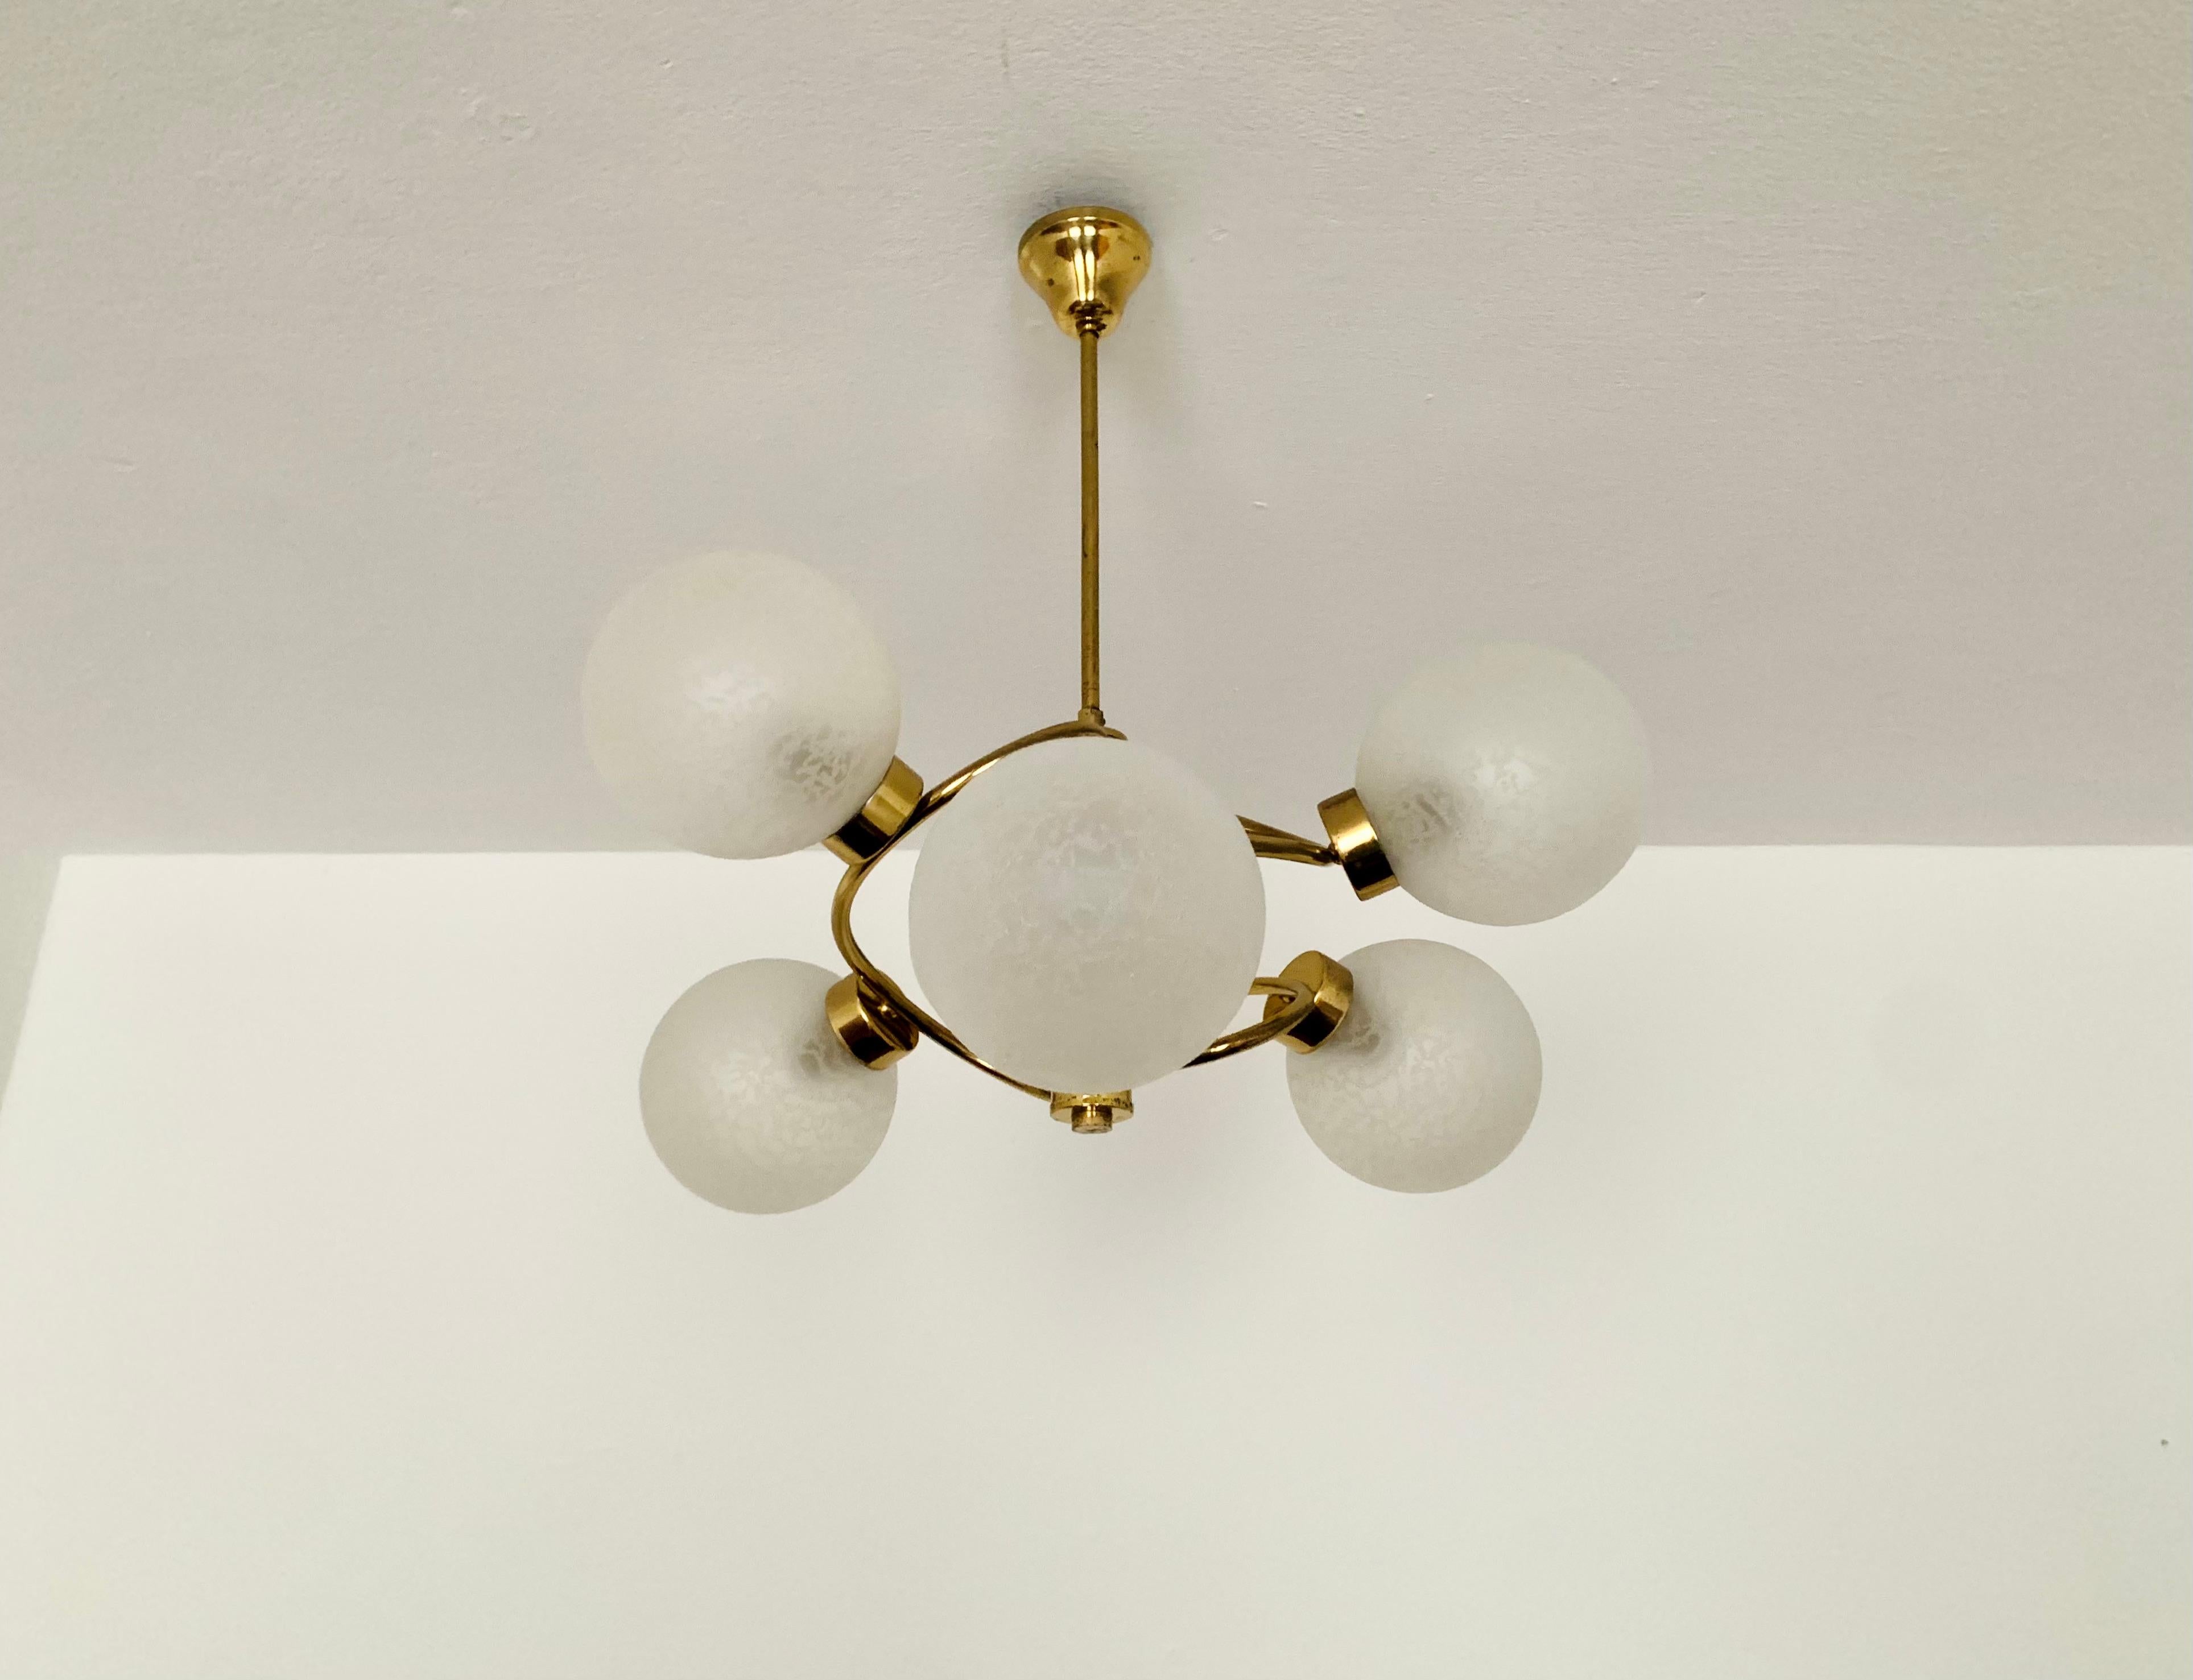 Wonderful Sputnik chandelier from the 1960s.
The 6 glass lampshades with structure spread a pleasant light.
The lamp is manufactured to a very high quality.
Very contemporary design with a fantastic look.

Condition:

Very good vintage condition